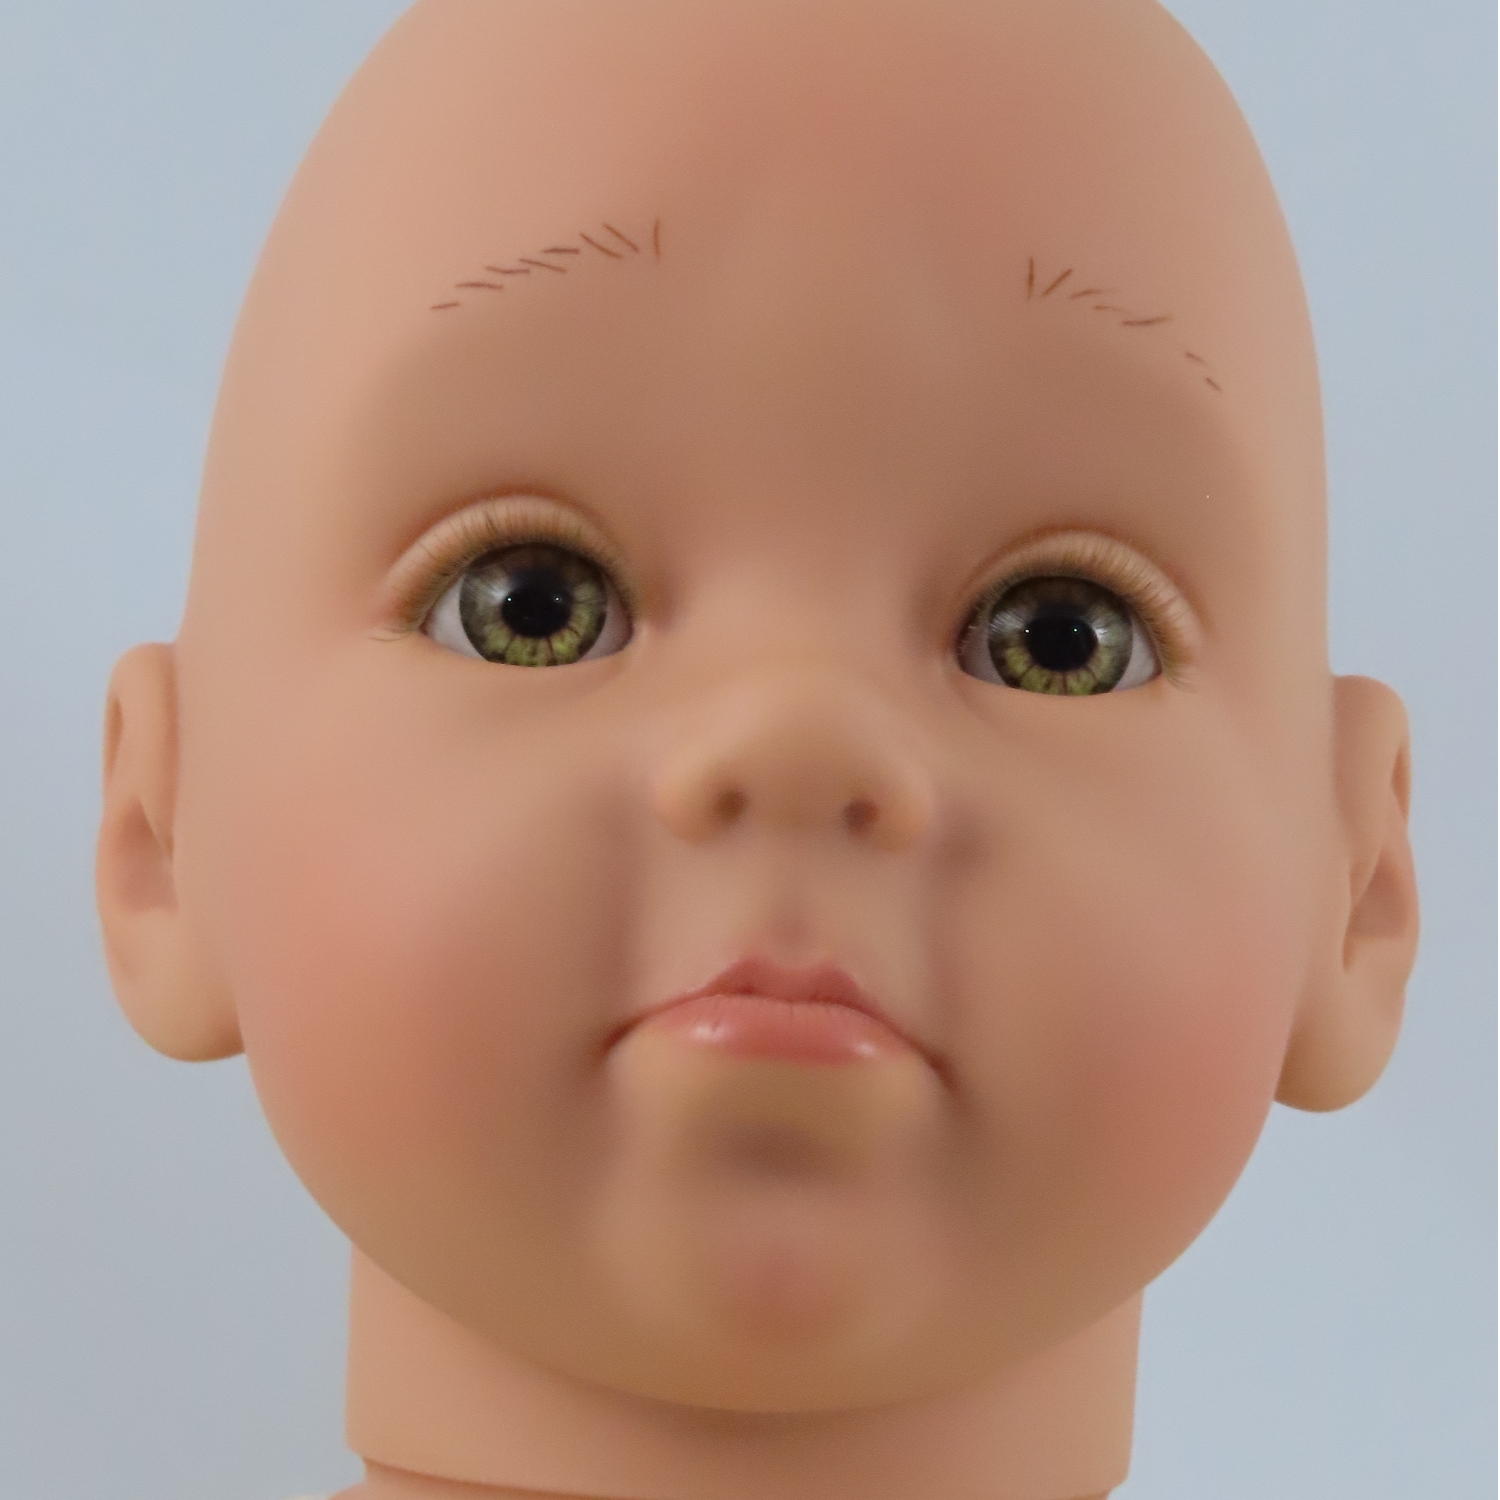 Pouty Doll Kit for Creating Toddler and Baby Dolls That Look Real